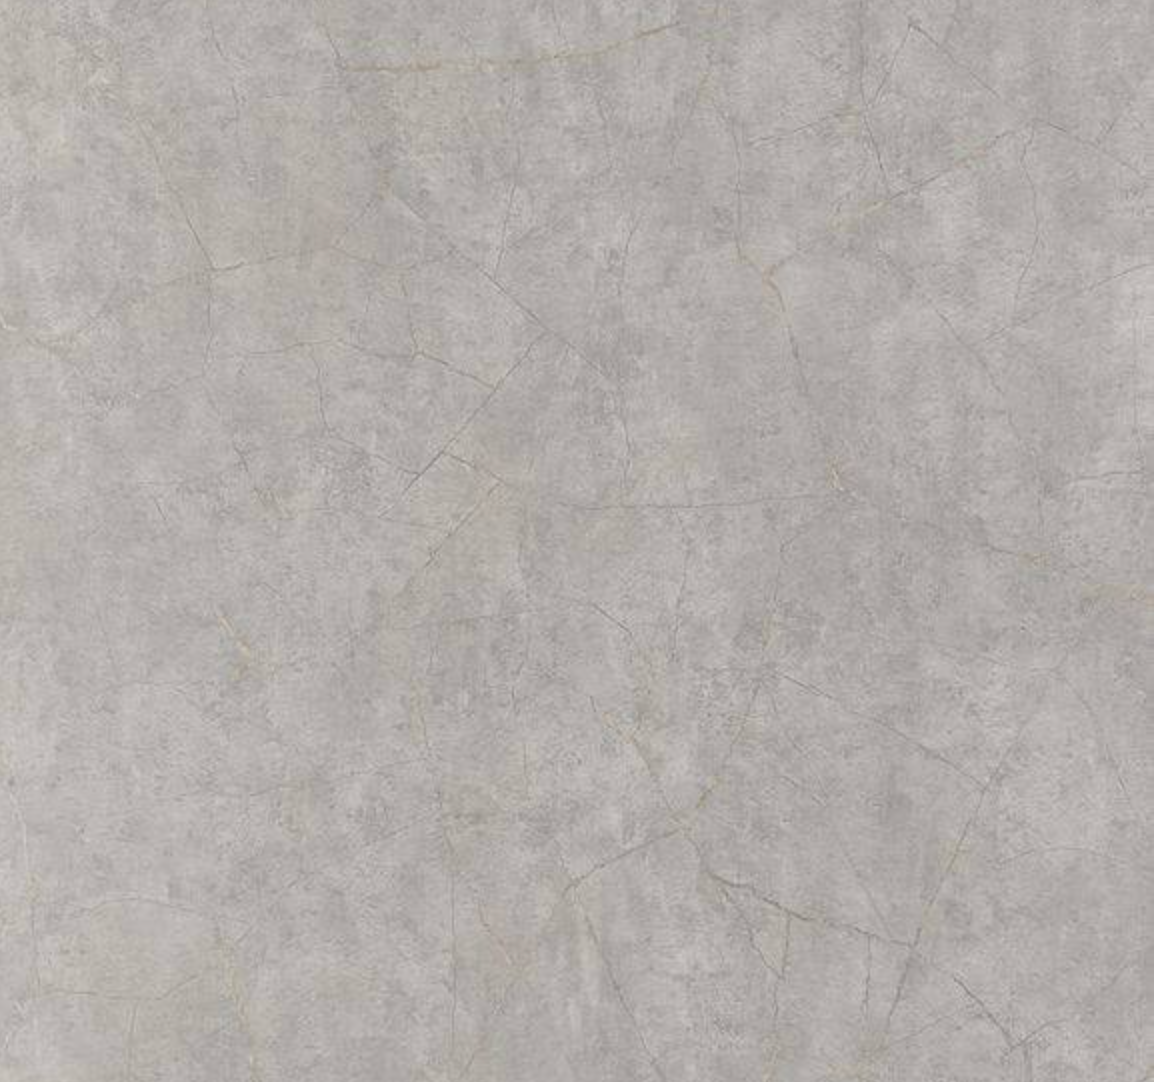 Showerwall Laminate Quarry Collection - Silver Slate